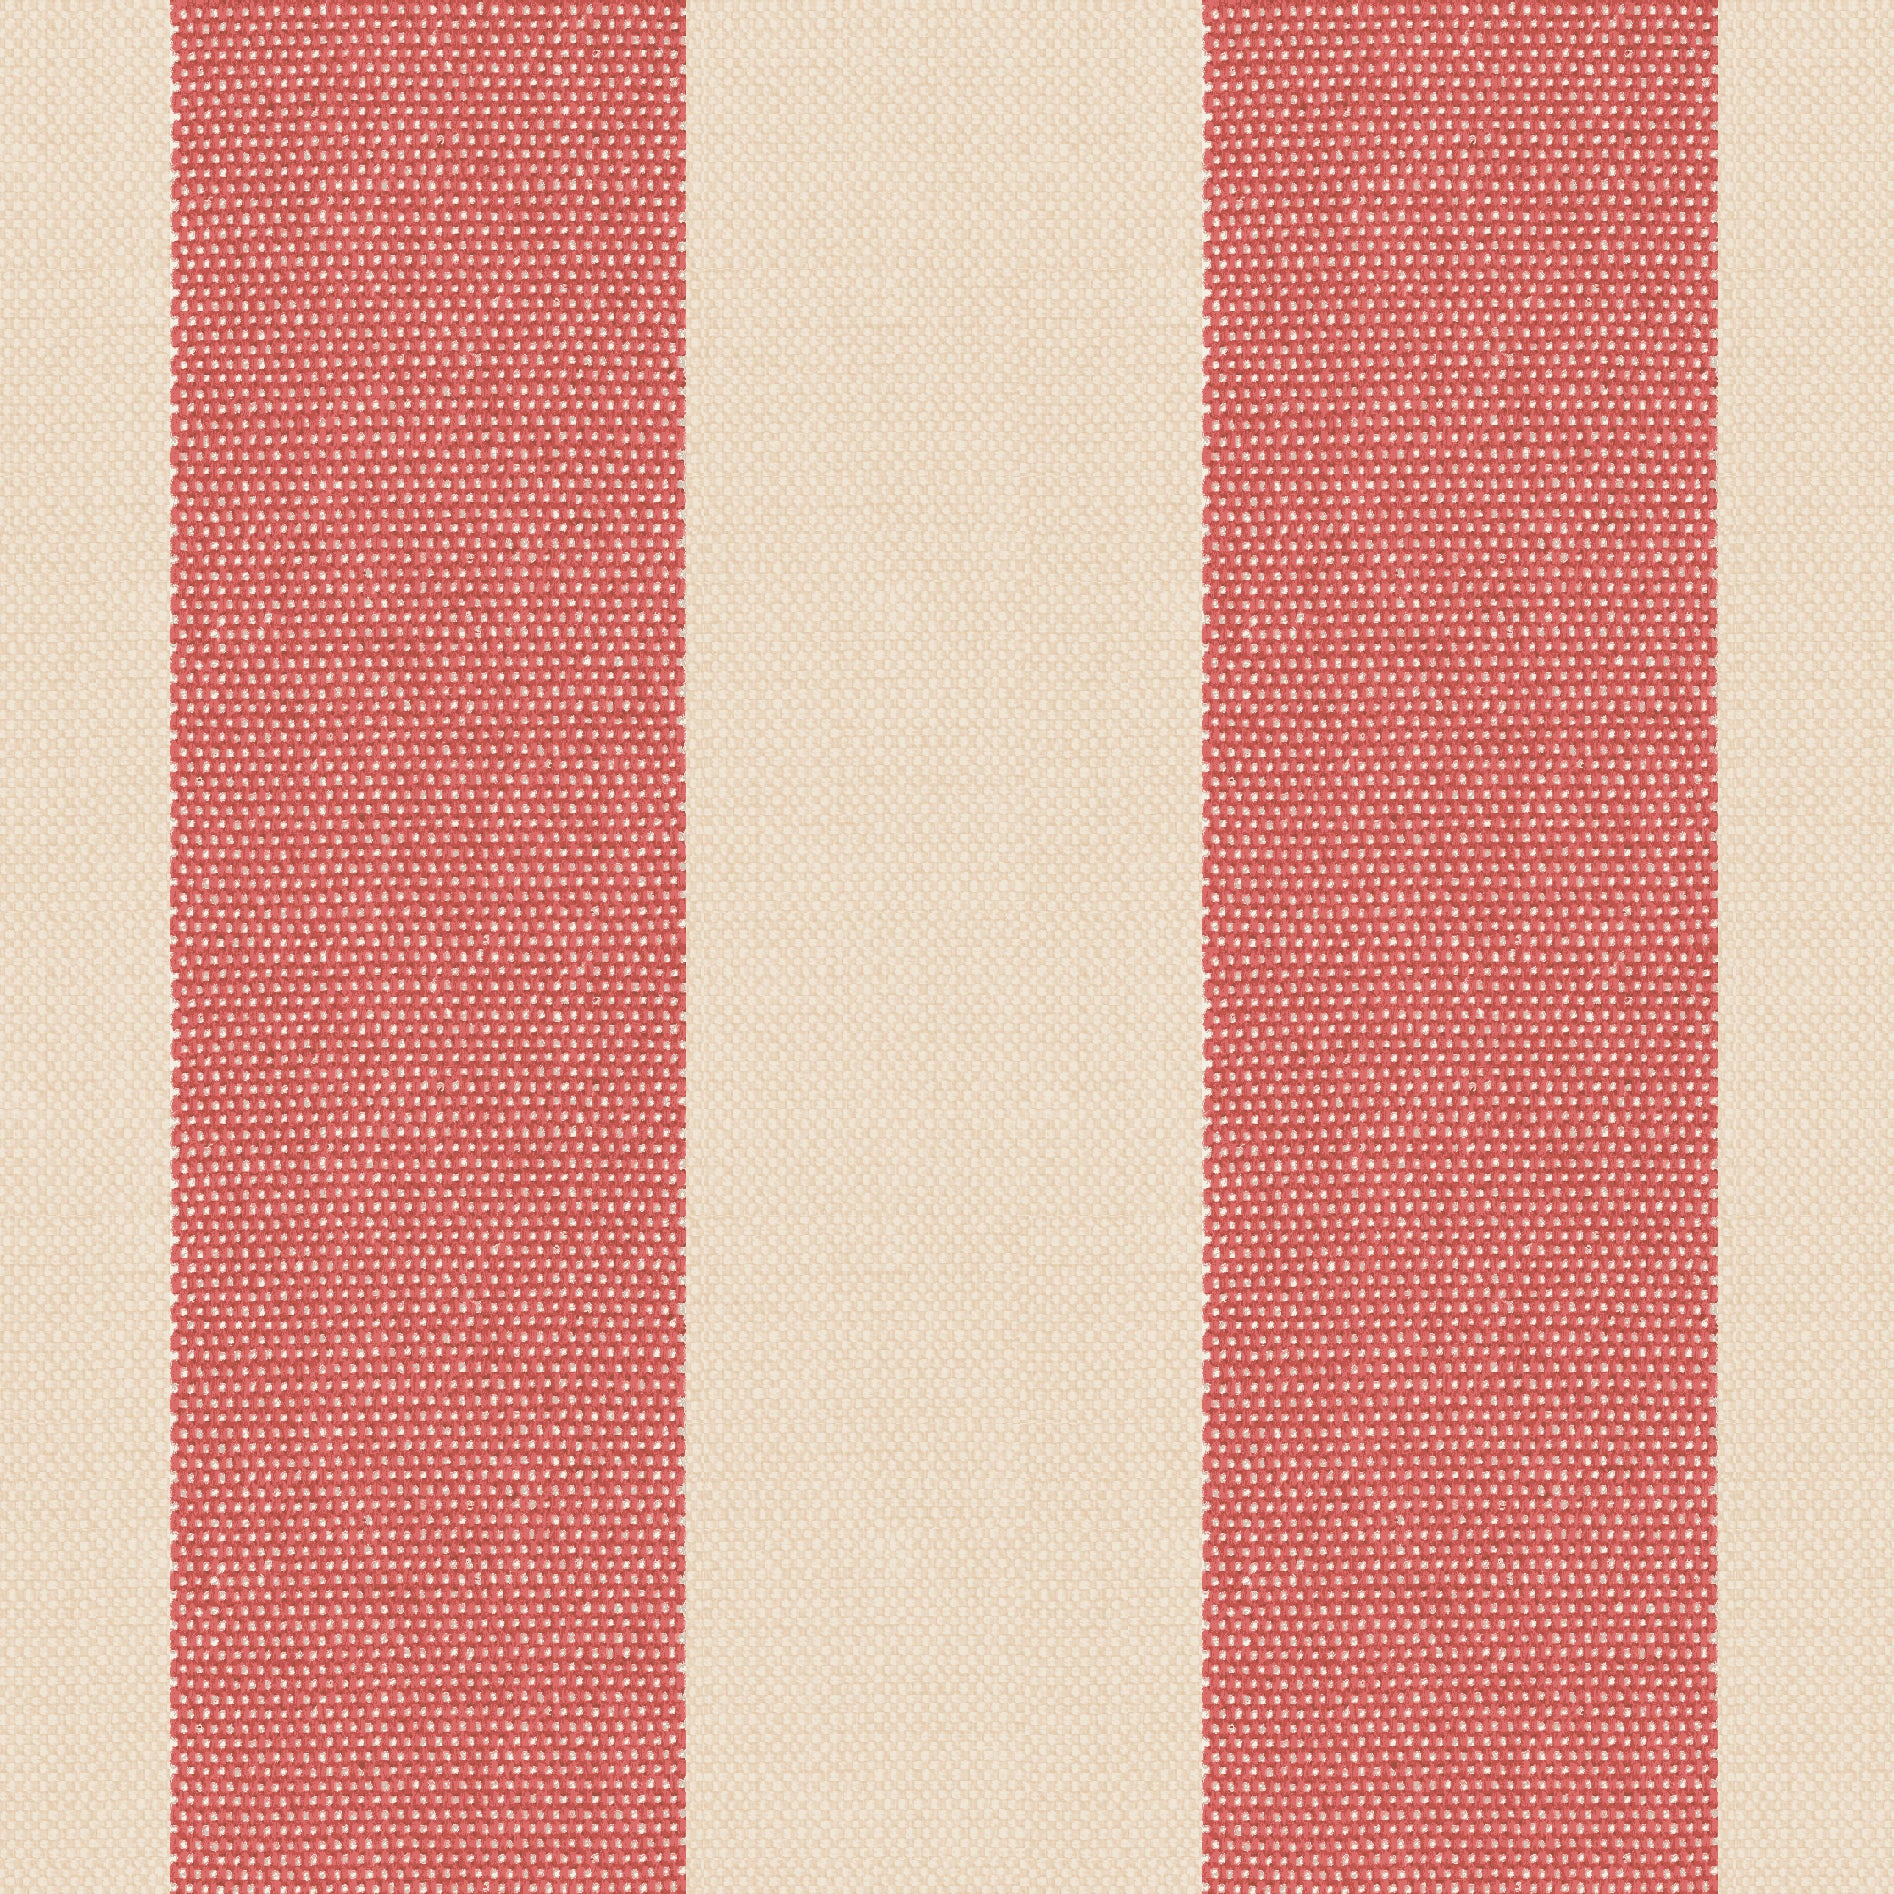 Beatrice Daylight Stripe Made to Measure Roller Blind Fabric Sample Beatrice Coral